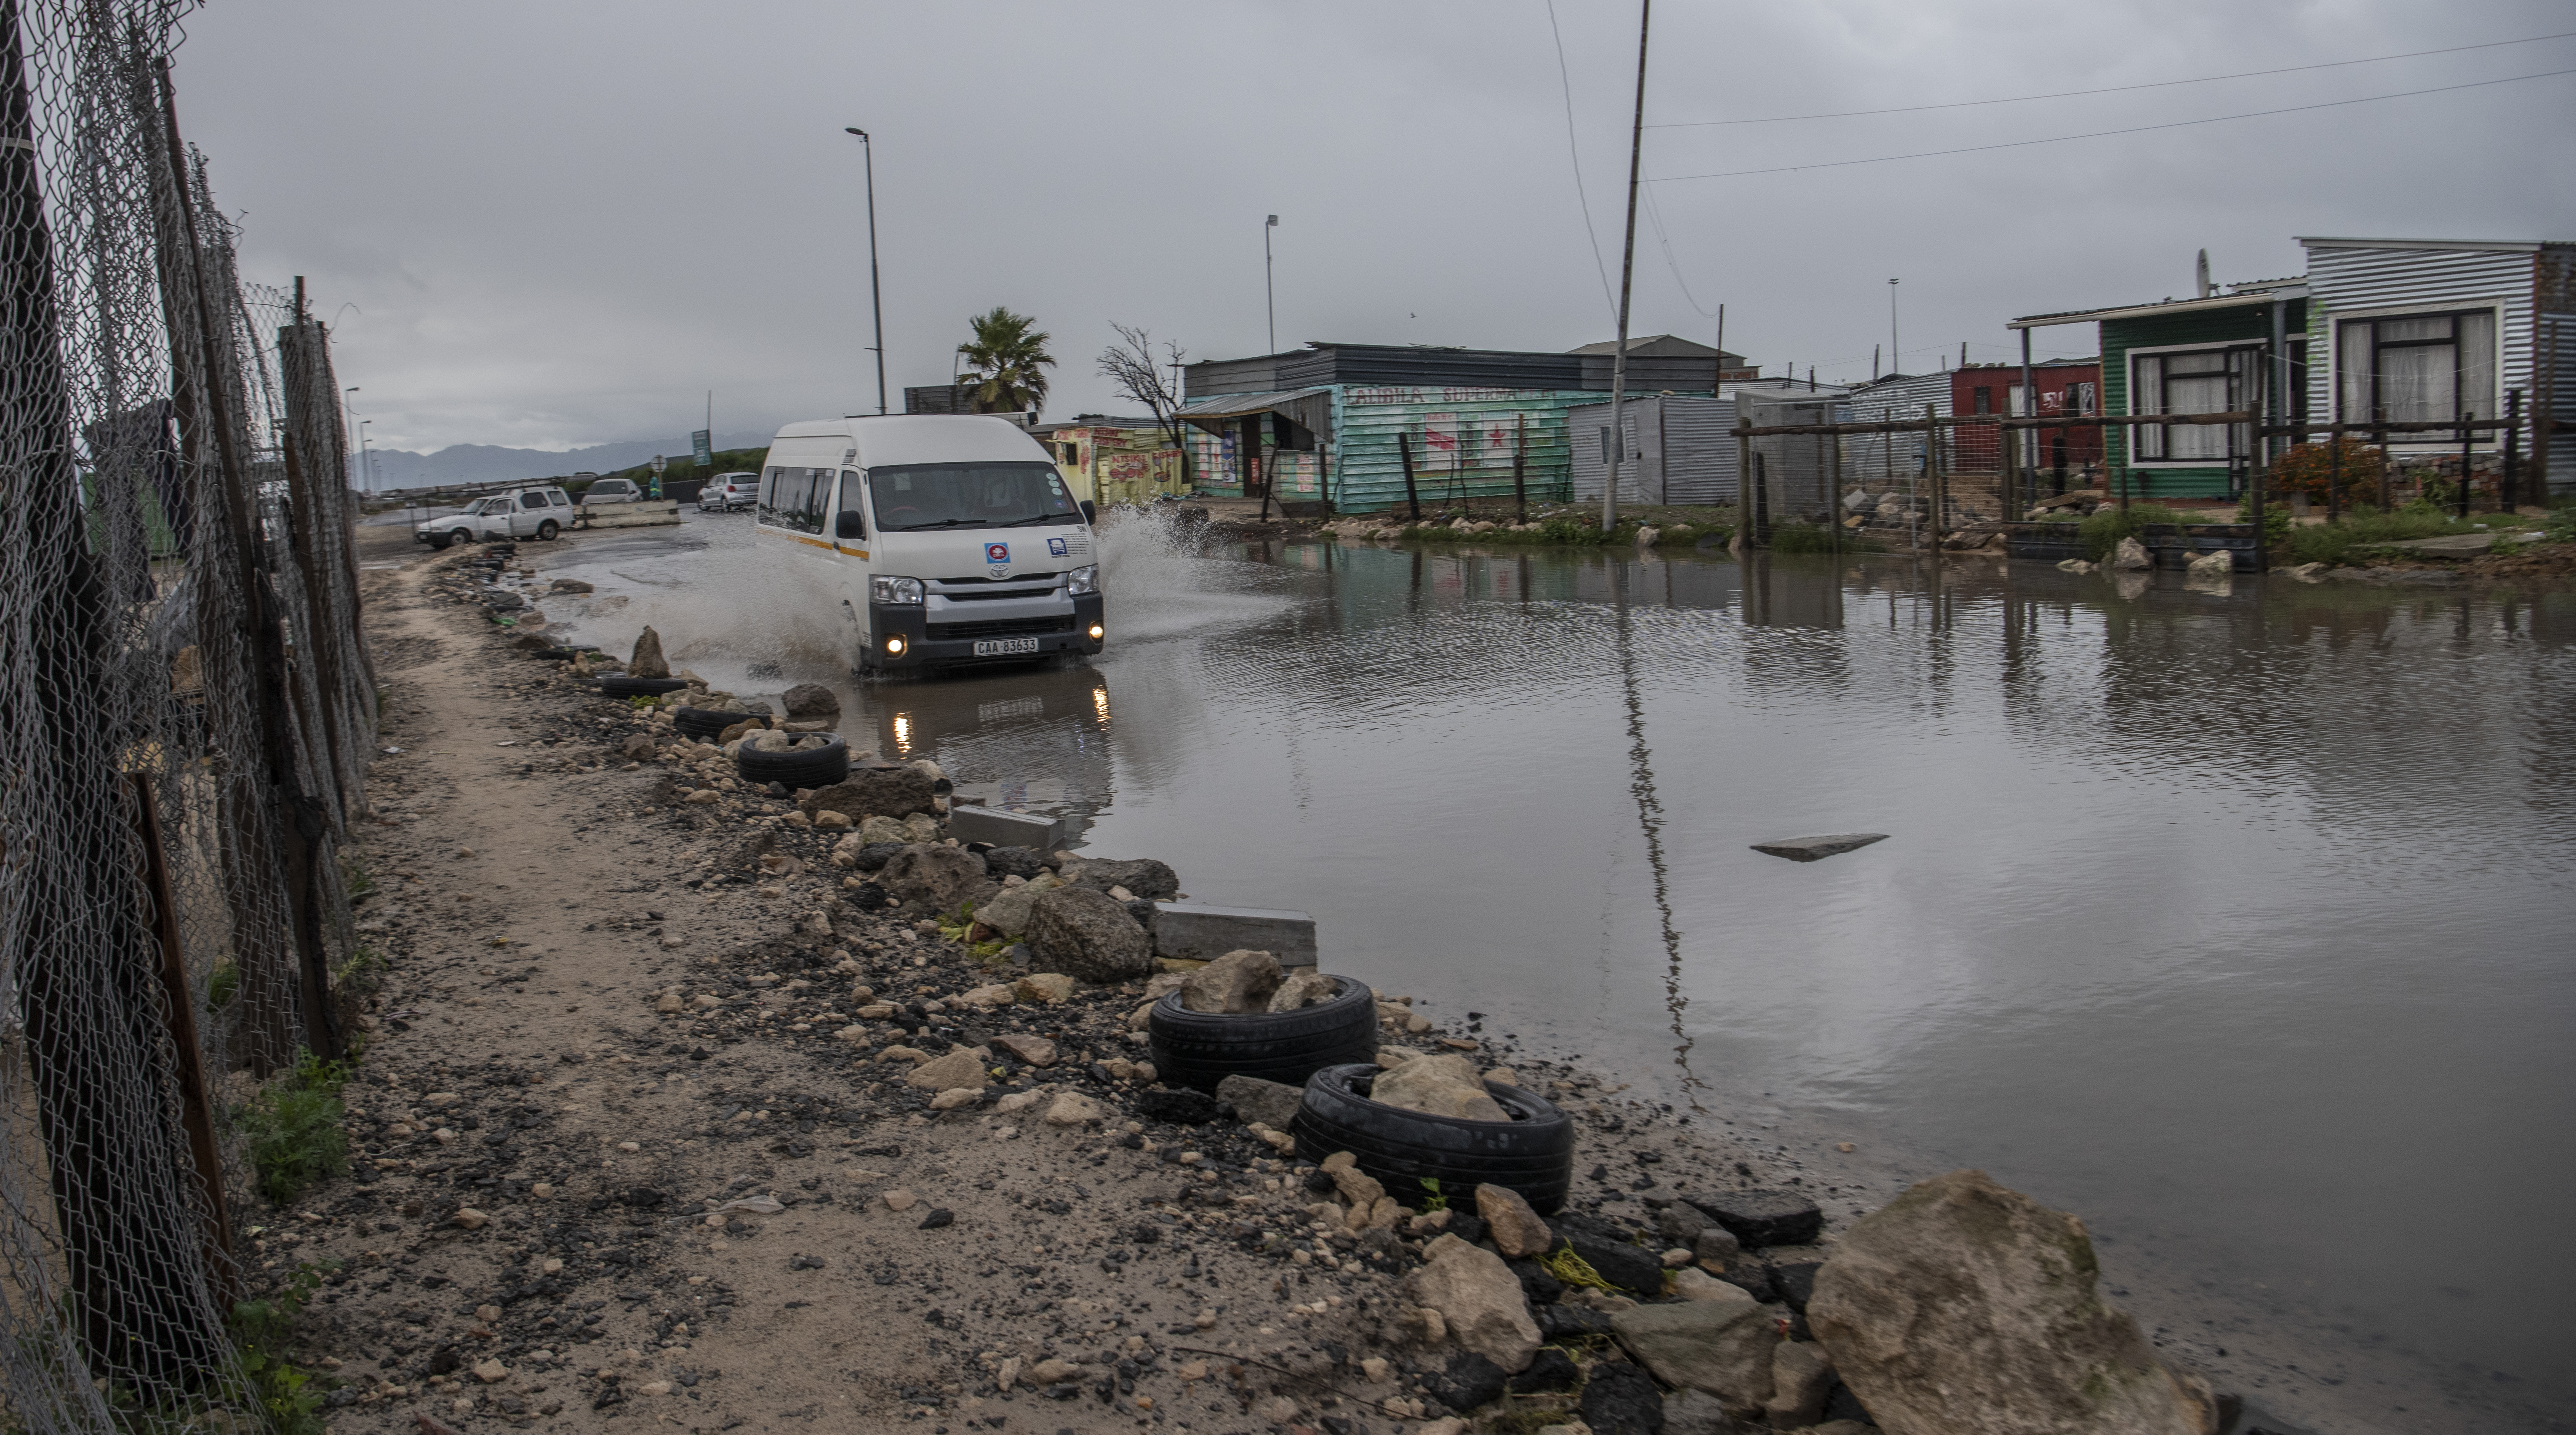 A taxi attempts to make its way through the flooded streets of Khayelitsha